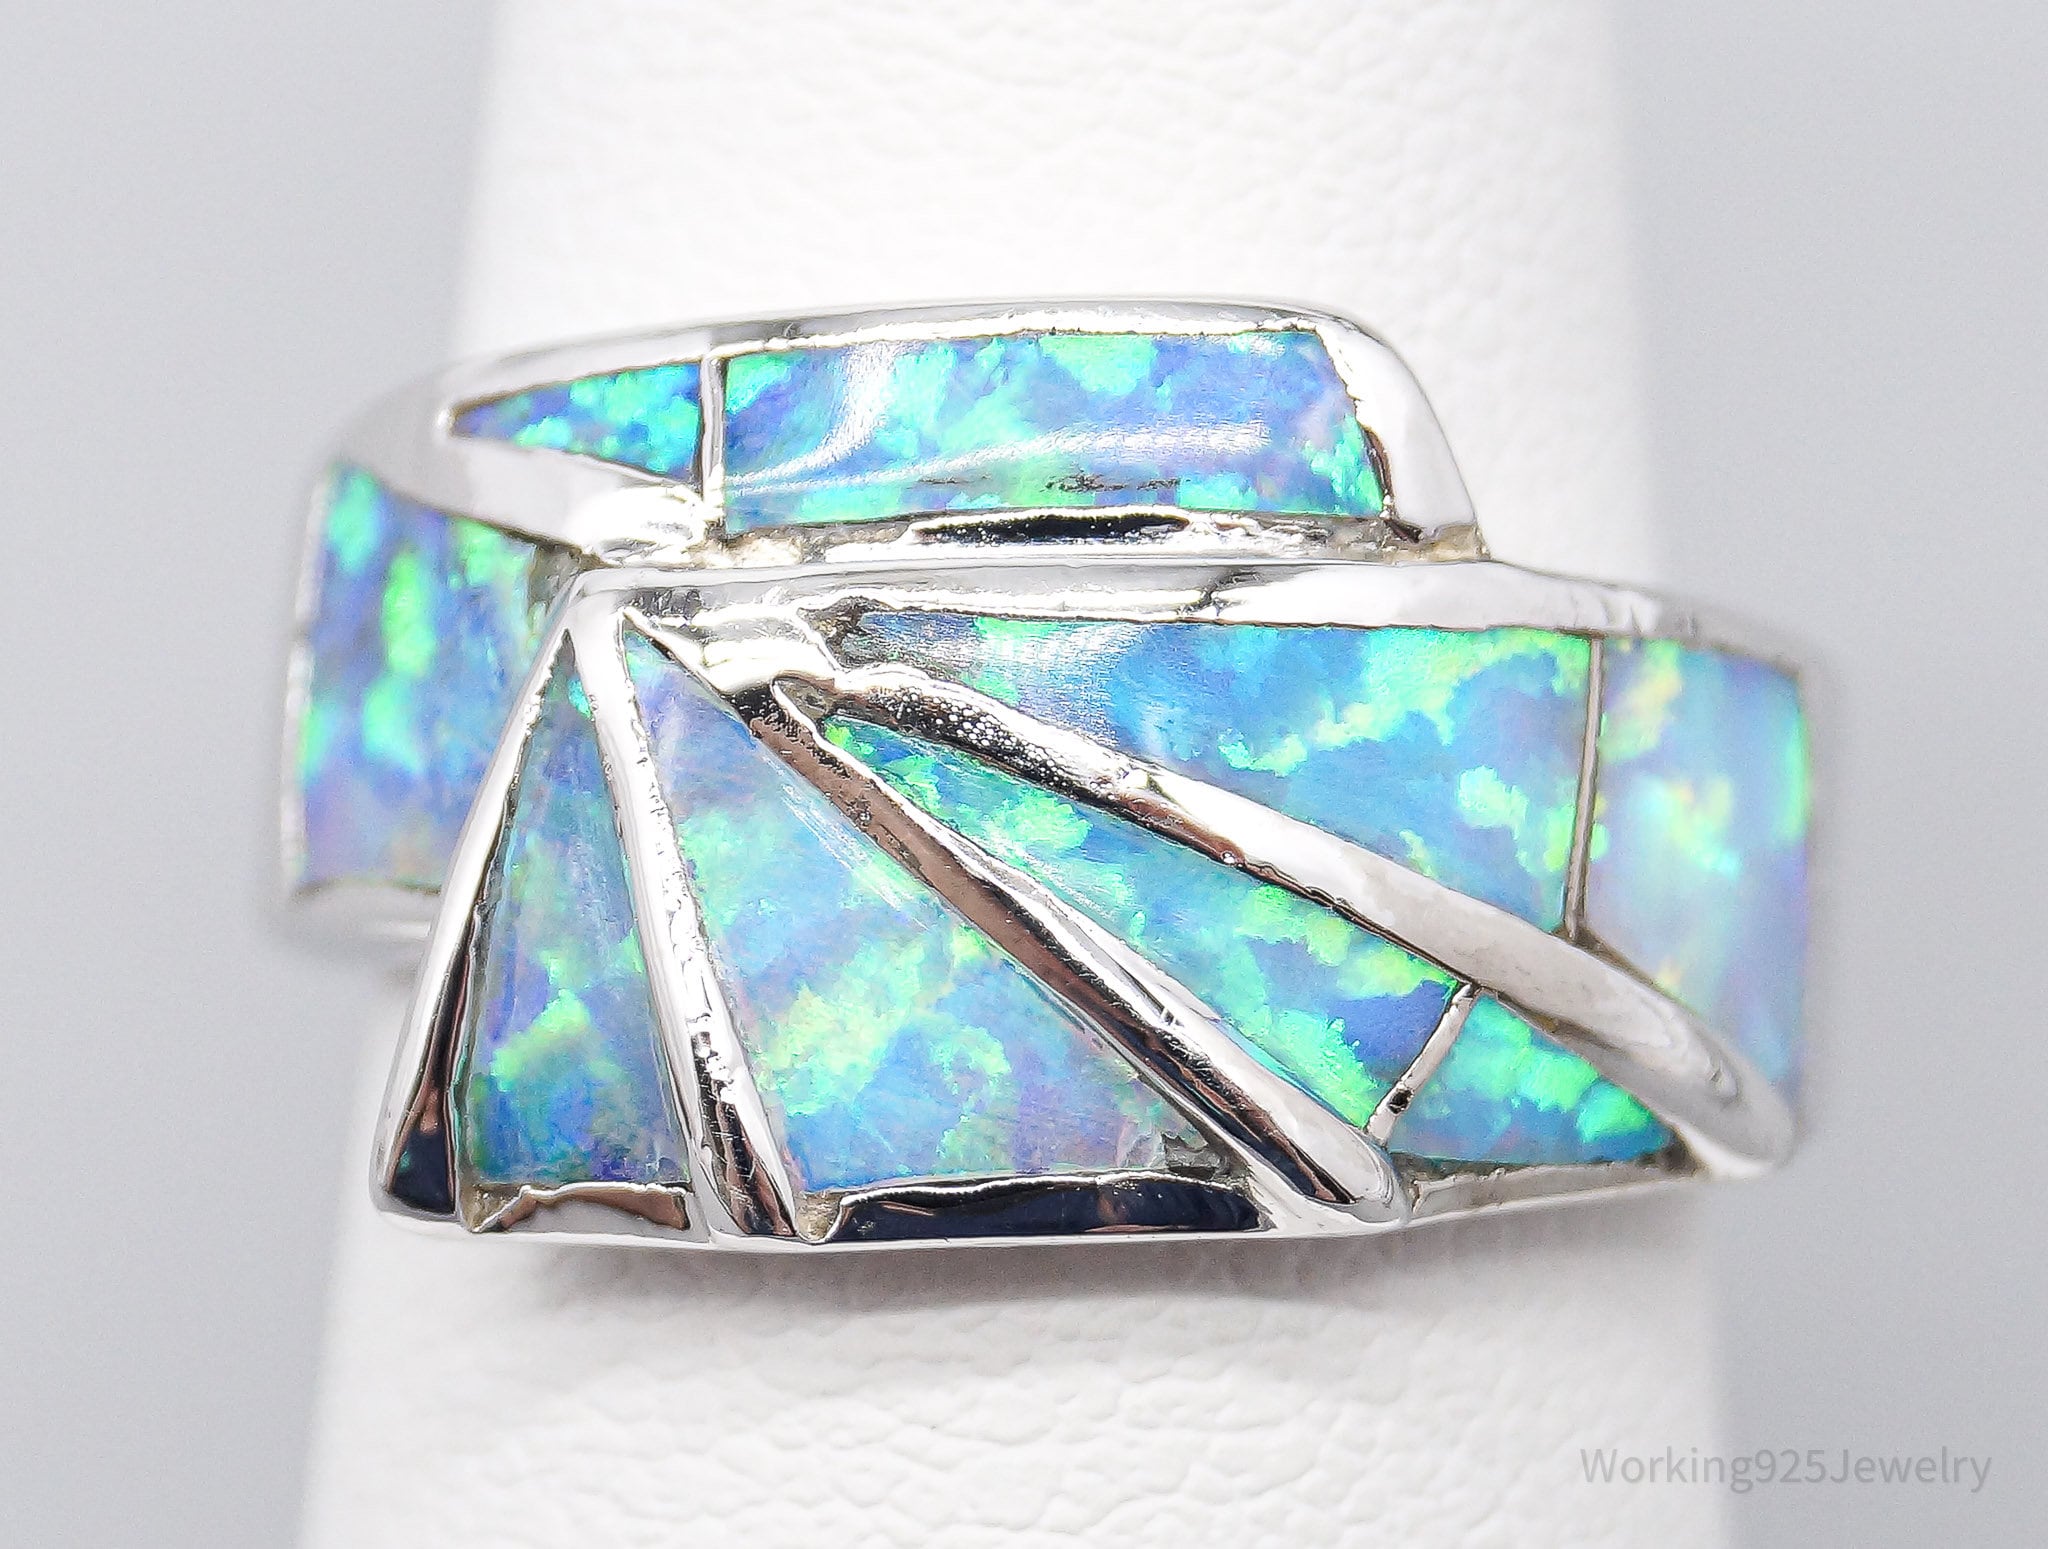 Vintage Blue Opal Inlay Sterling Silver Ring - Size 5.75